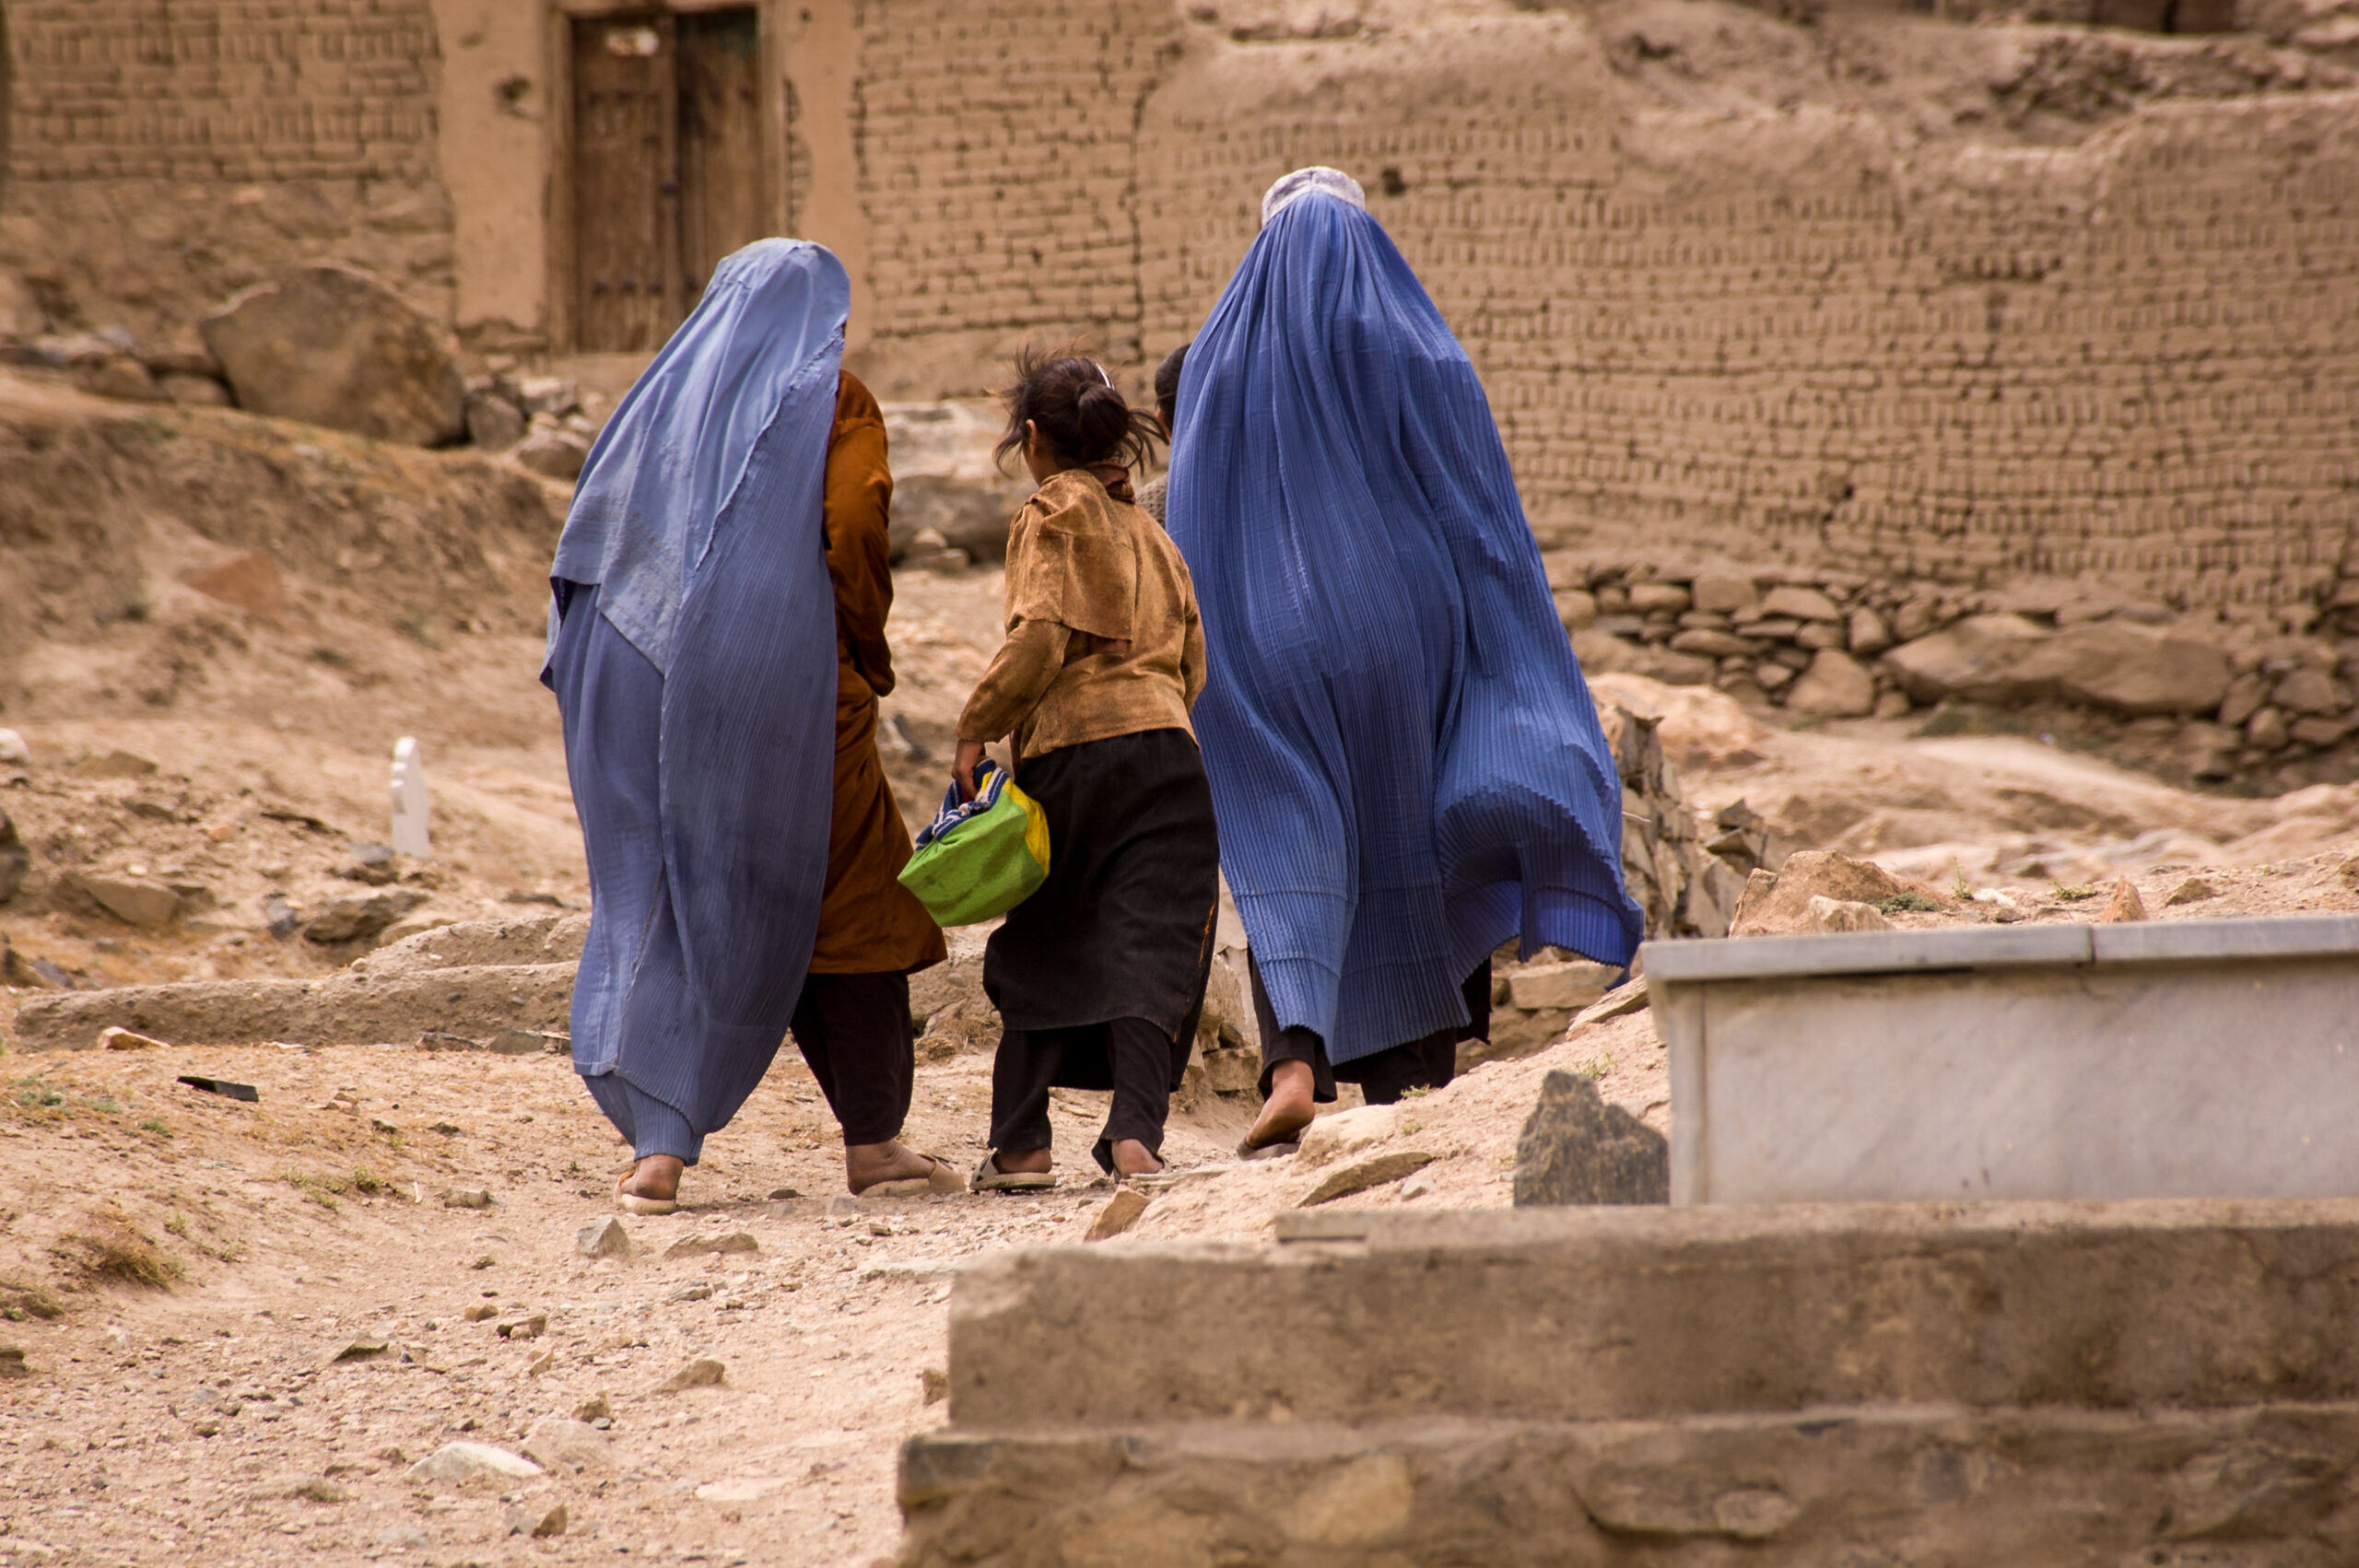 Two women and a girl walk through a graveyard in Kabul, Afghanistan